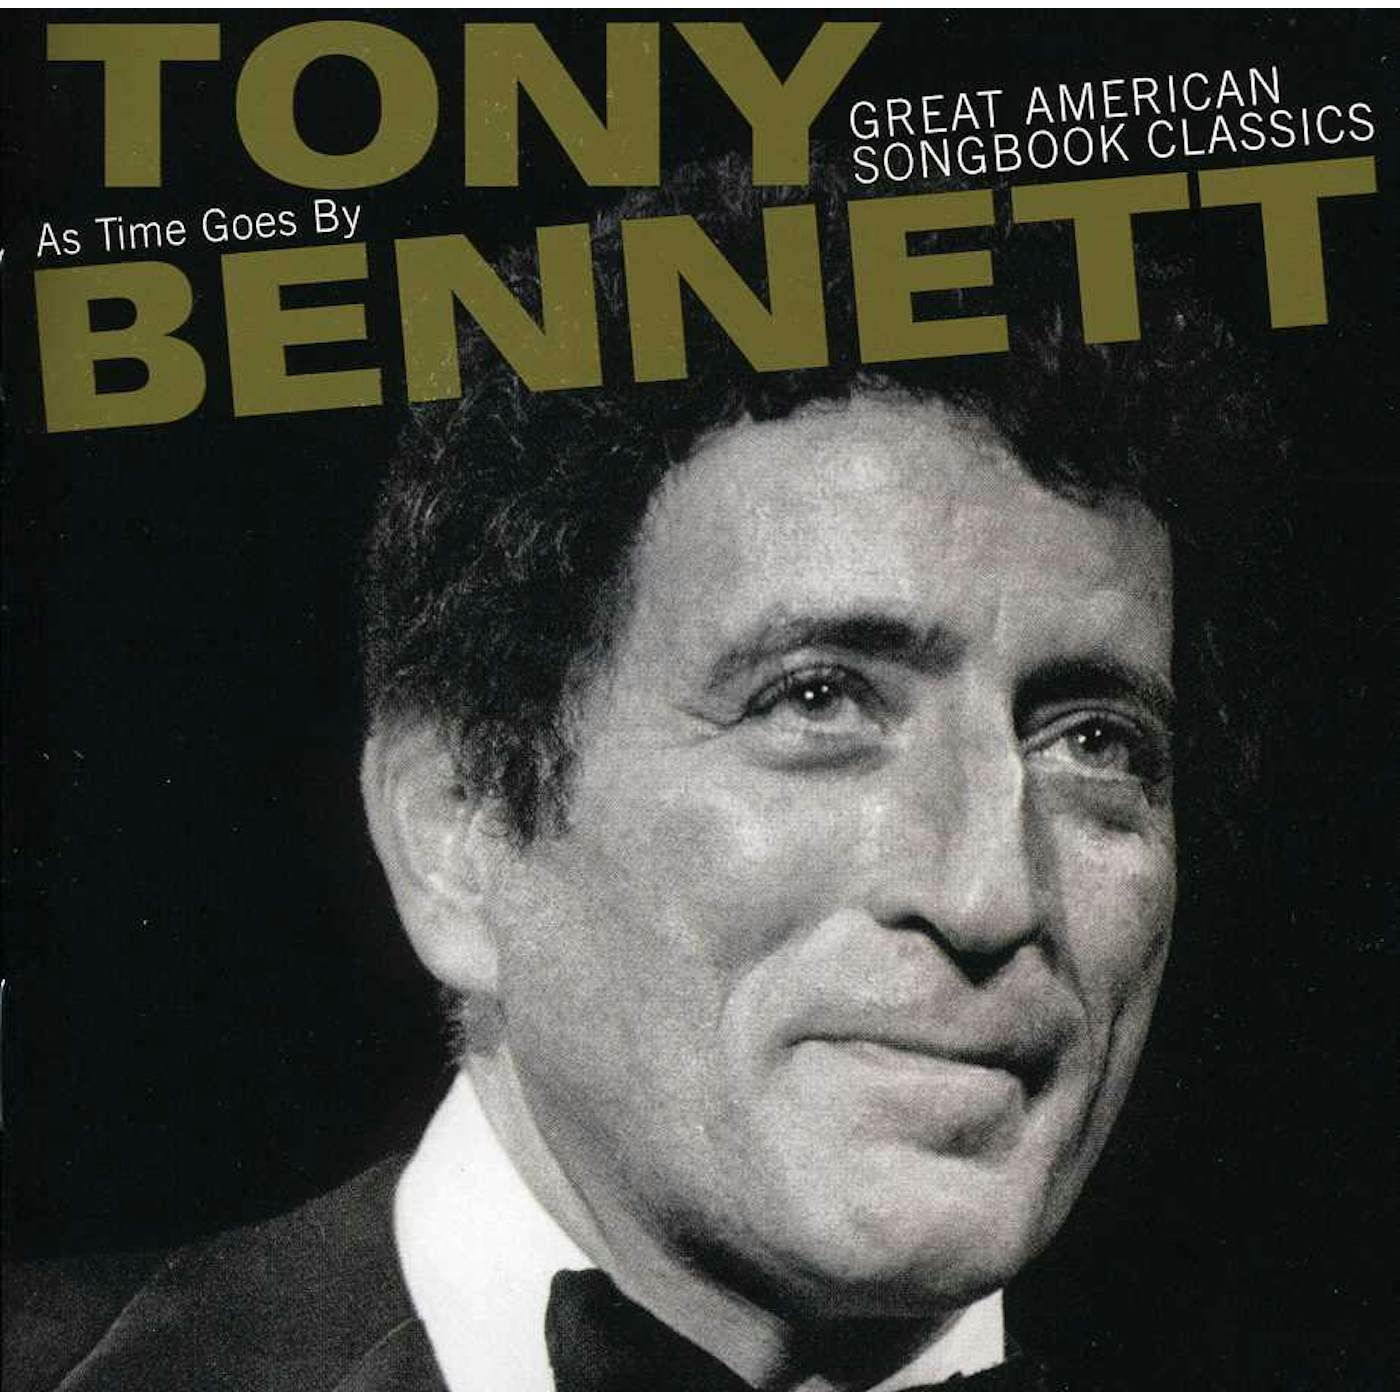 Tony Bennett AS TIME GOES BY: GREAT AMERICAN SONGBOOK CLASSICS CD